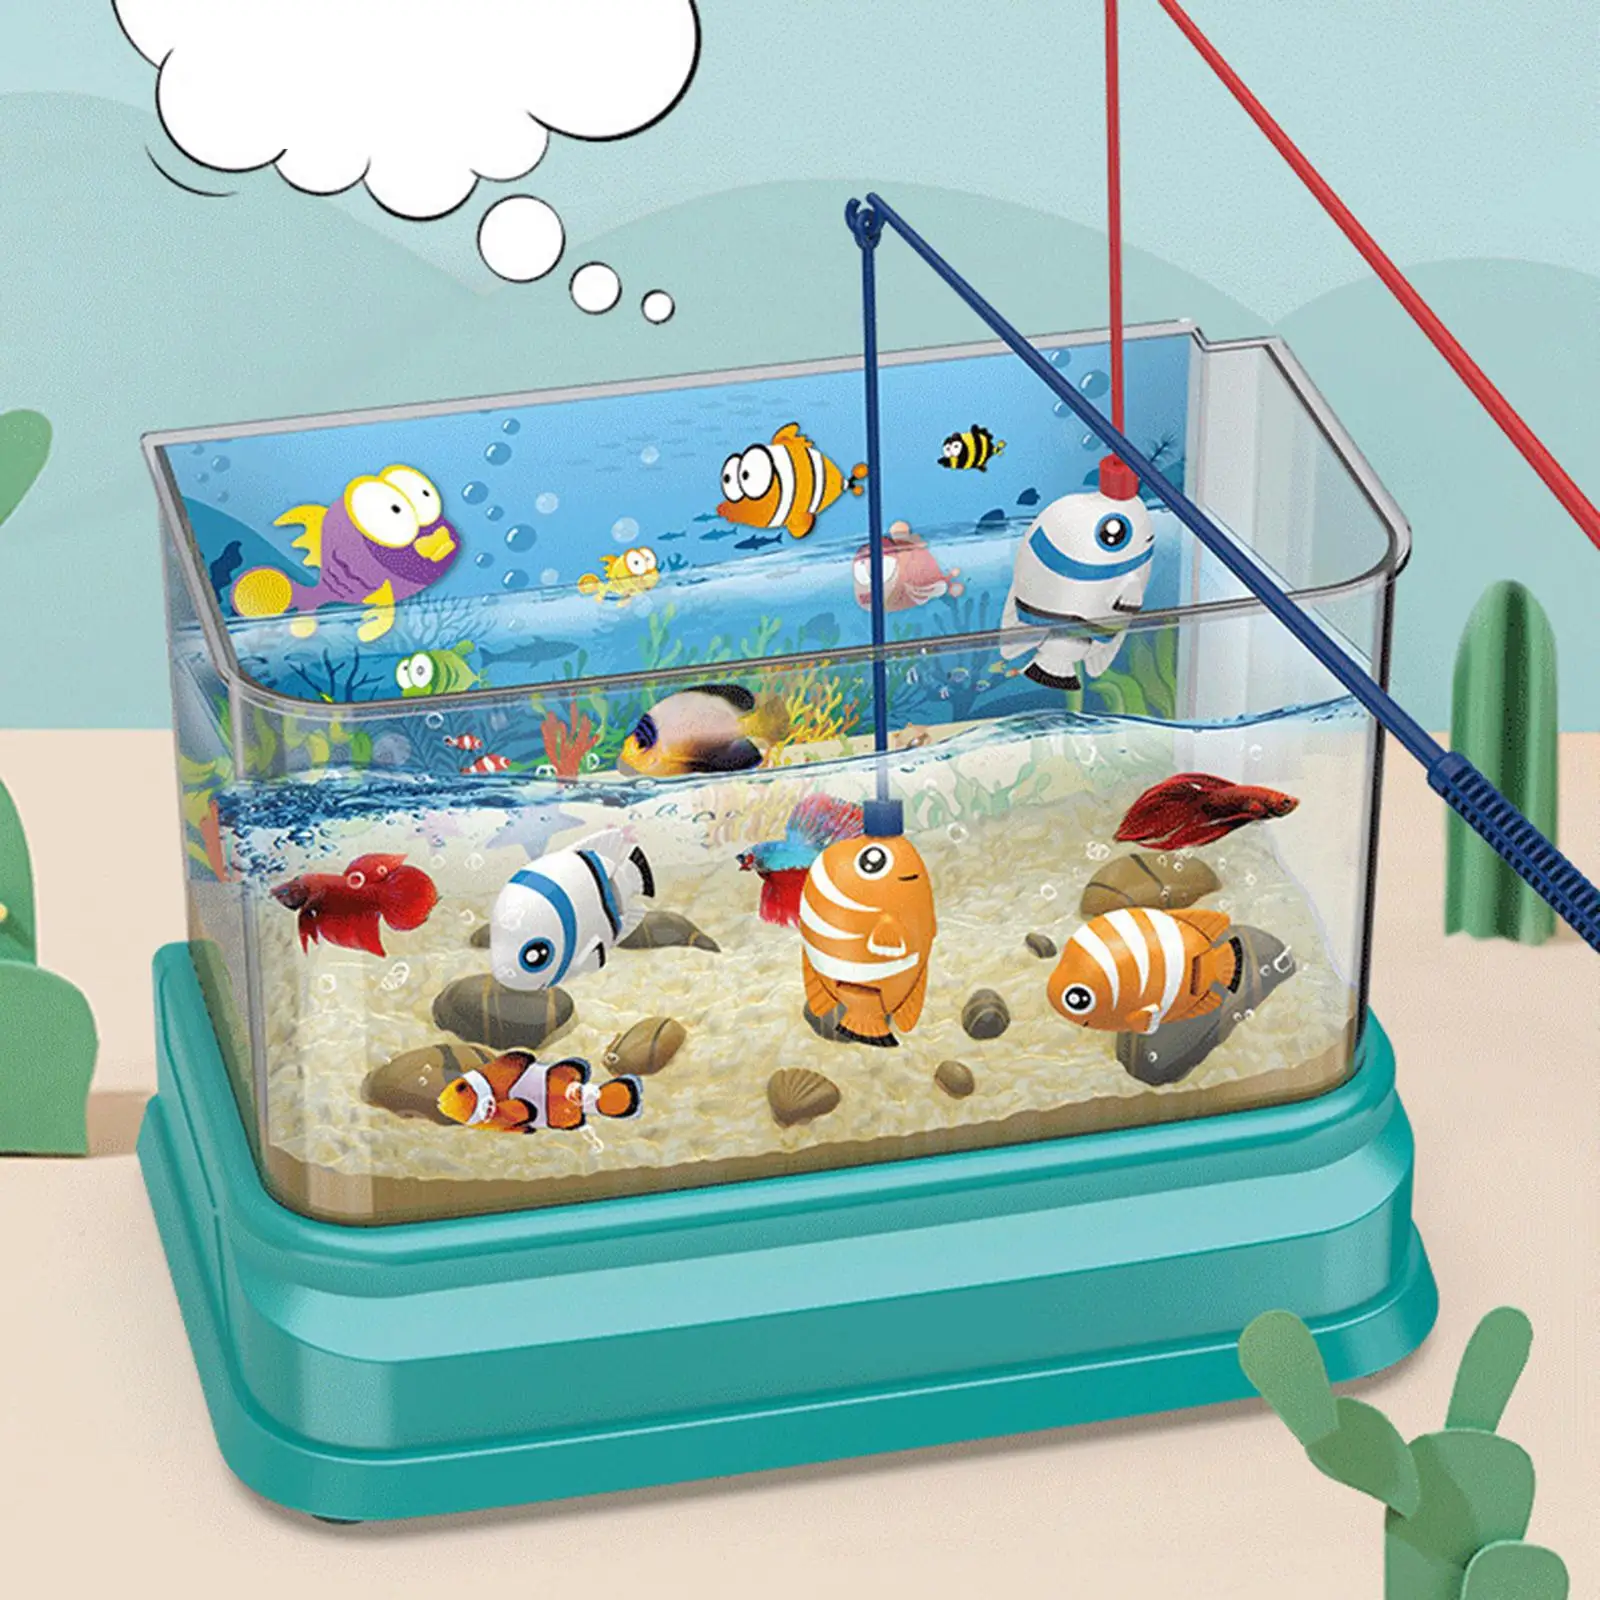 Artificial Fish Tank with Moving Music Fishing Rod Fine Motor Skill Training Small Aquarium for Toddlers Kids Children